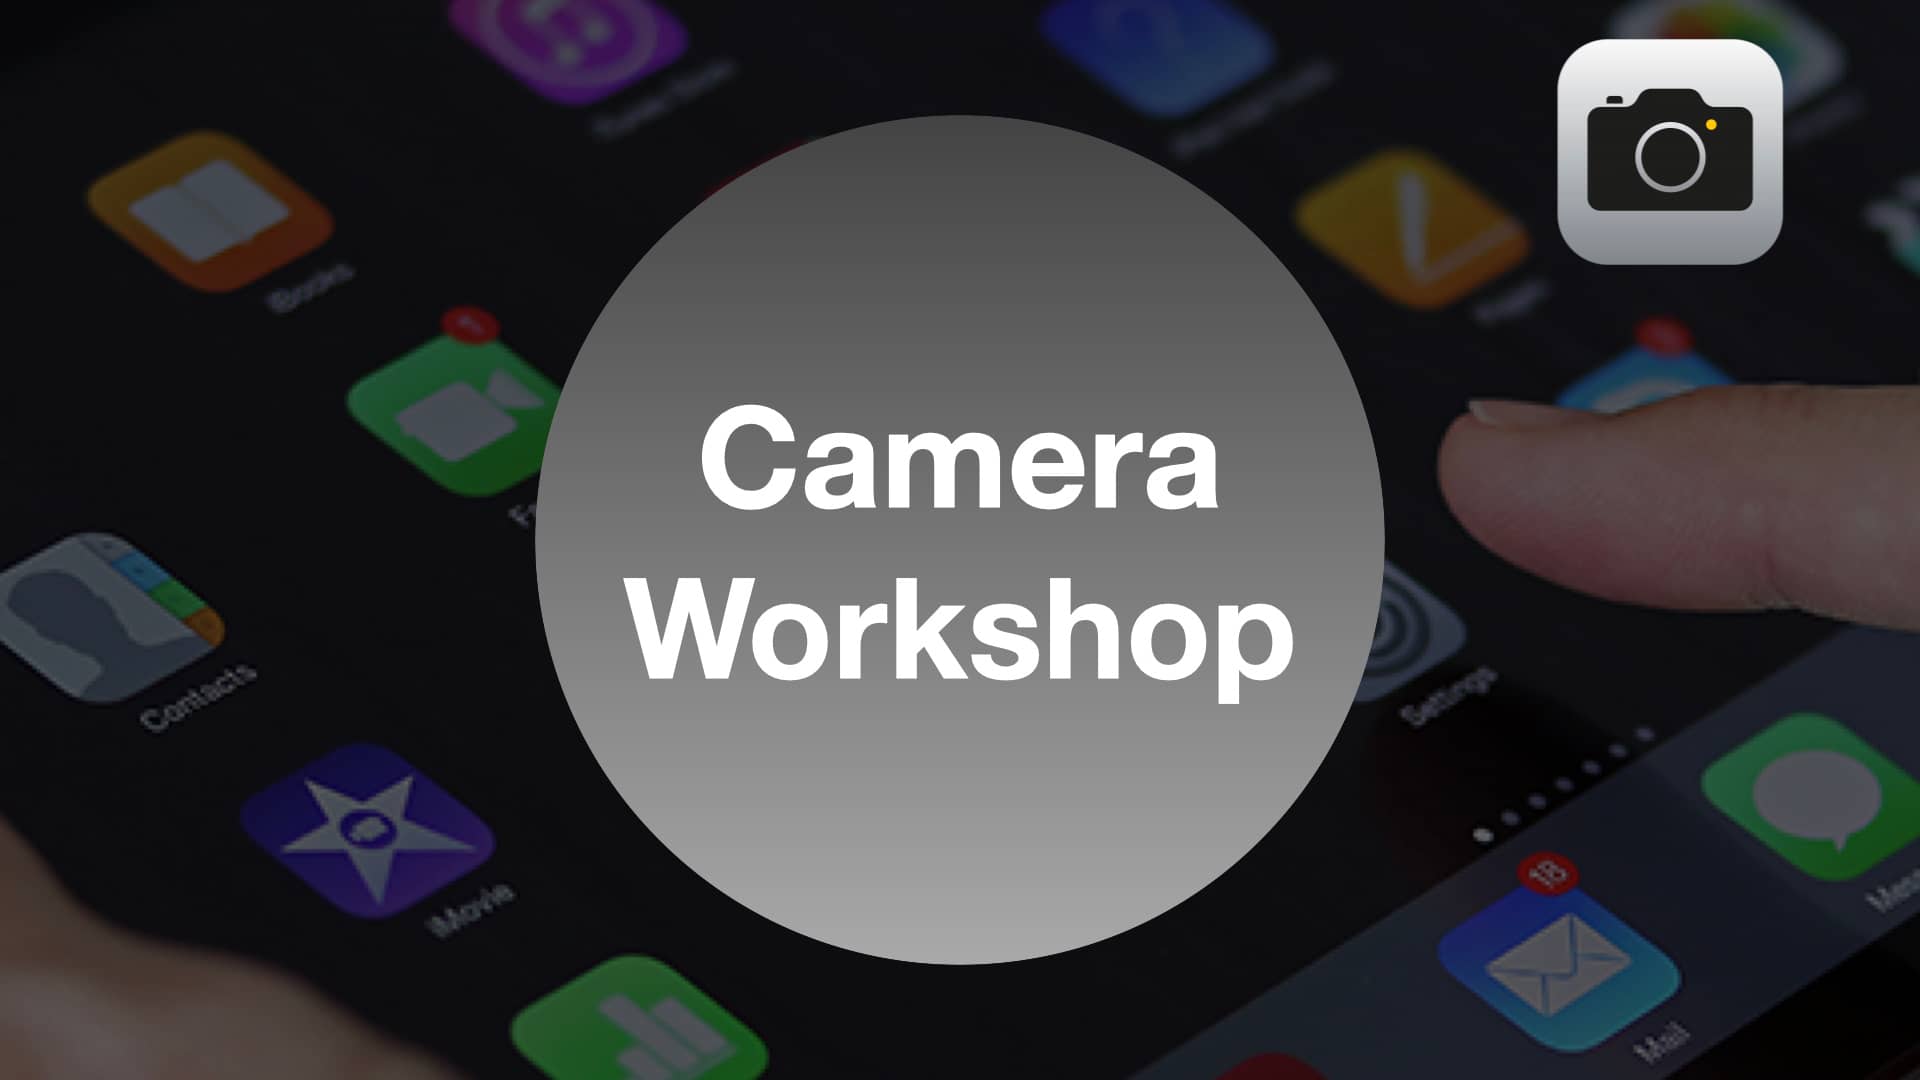 Exploring the iPhone Camera: Tips and Tricks to help take better photos and videos